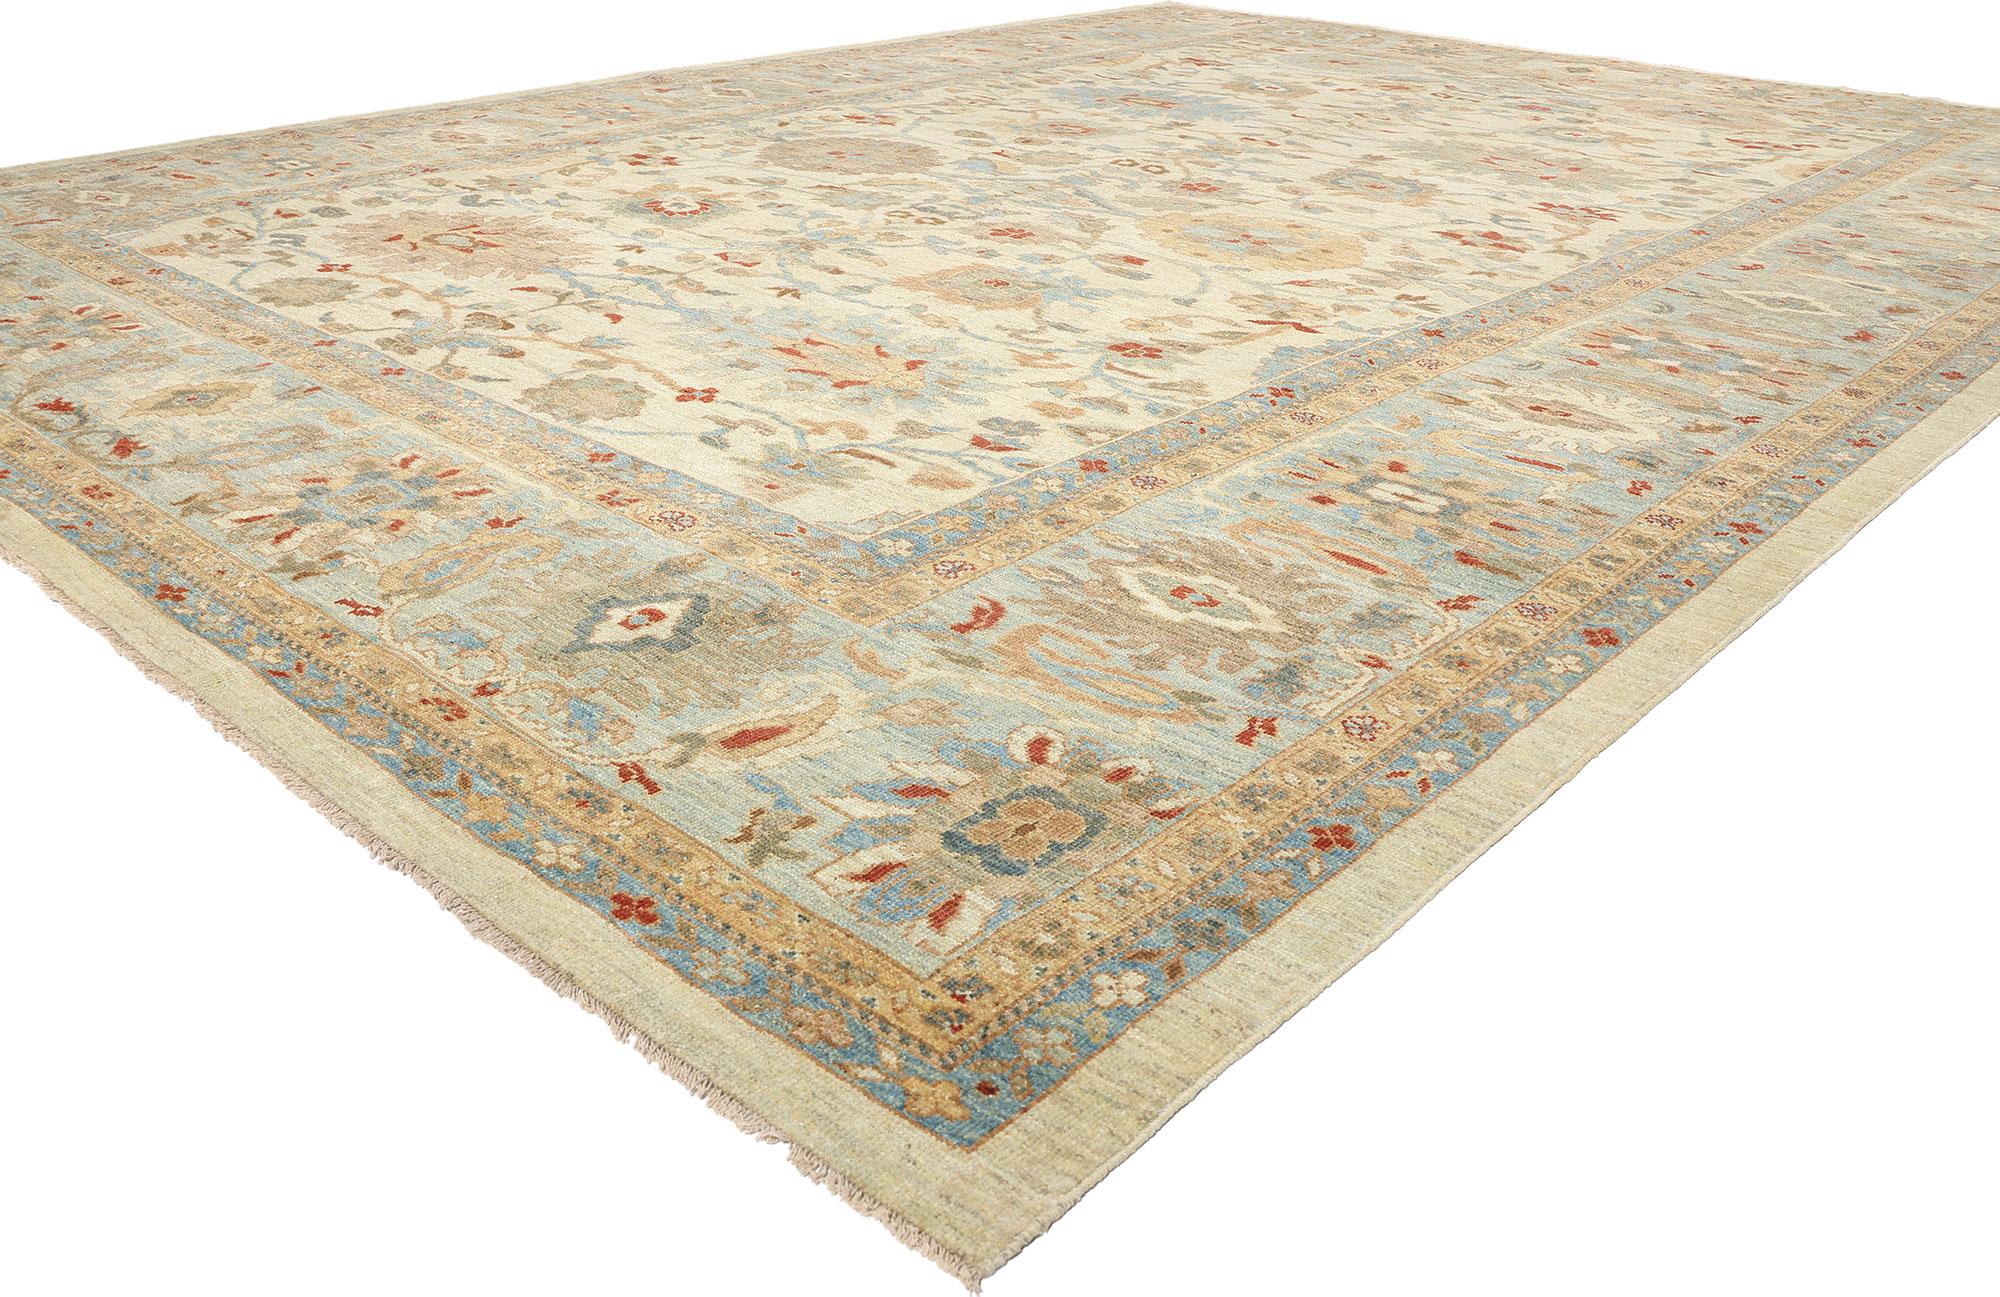 61282 Modern Beige Persian Sultanabad Rug, 13'04 x 17'10. Emerging from Iran's Sultanabad region, Persian Sultanabad rugs command admiration for their unparalleled craftsmanship, enduring fabrics, and intricate artistry. Meticulously woven by hand,